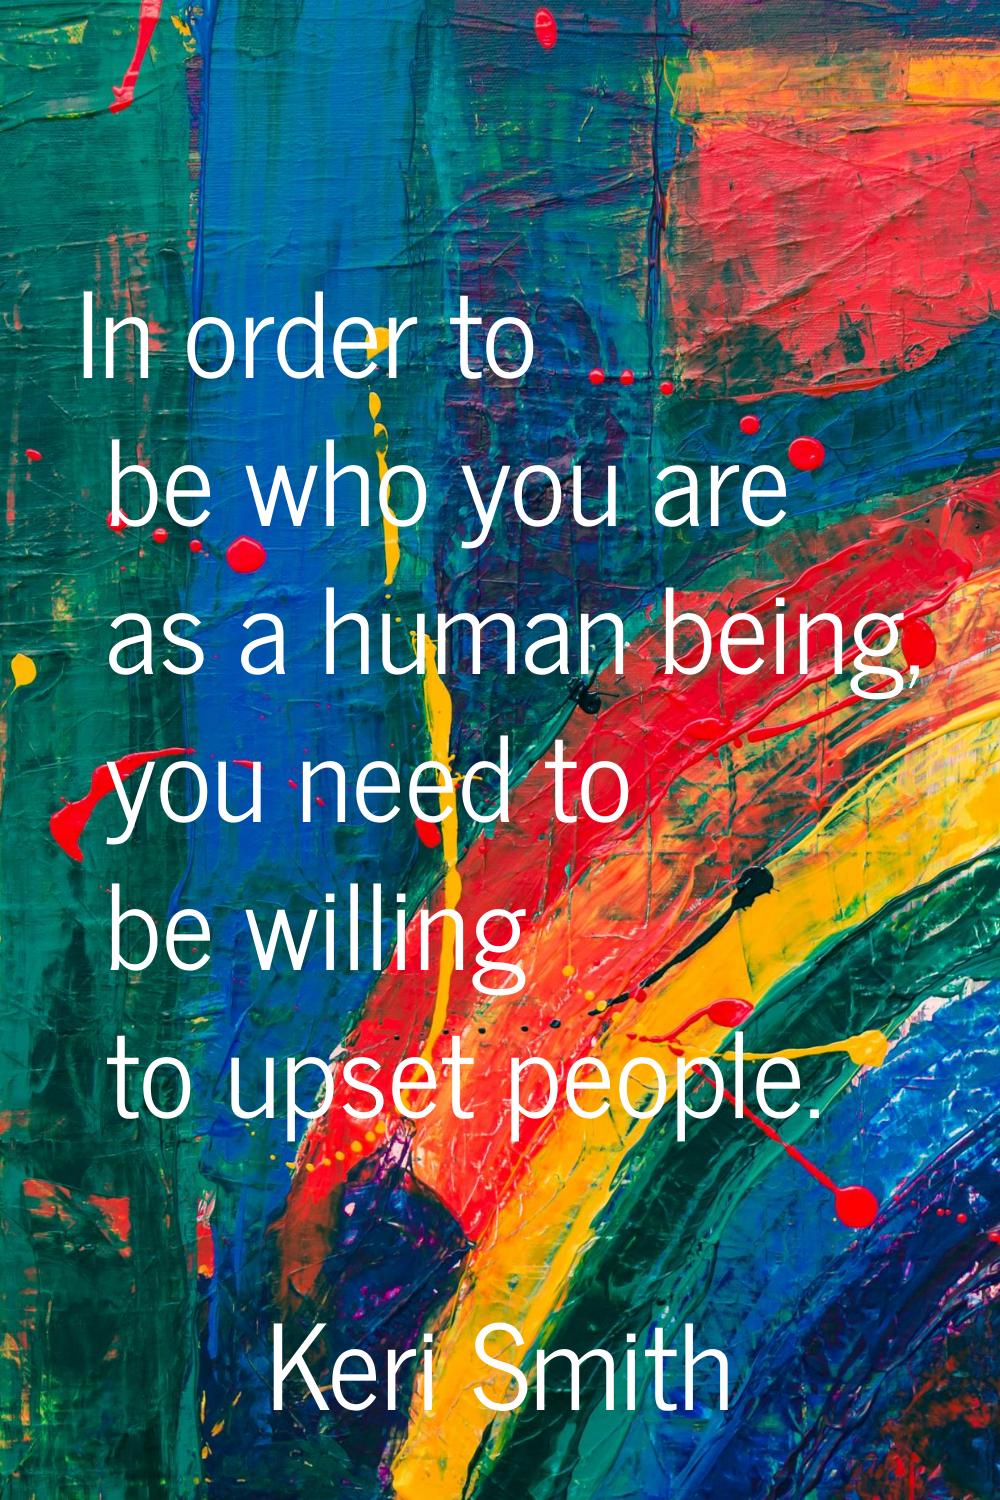 In order to be who you are as a human being, you need to be willing to upset people.